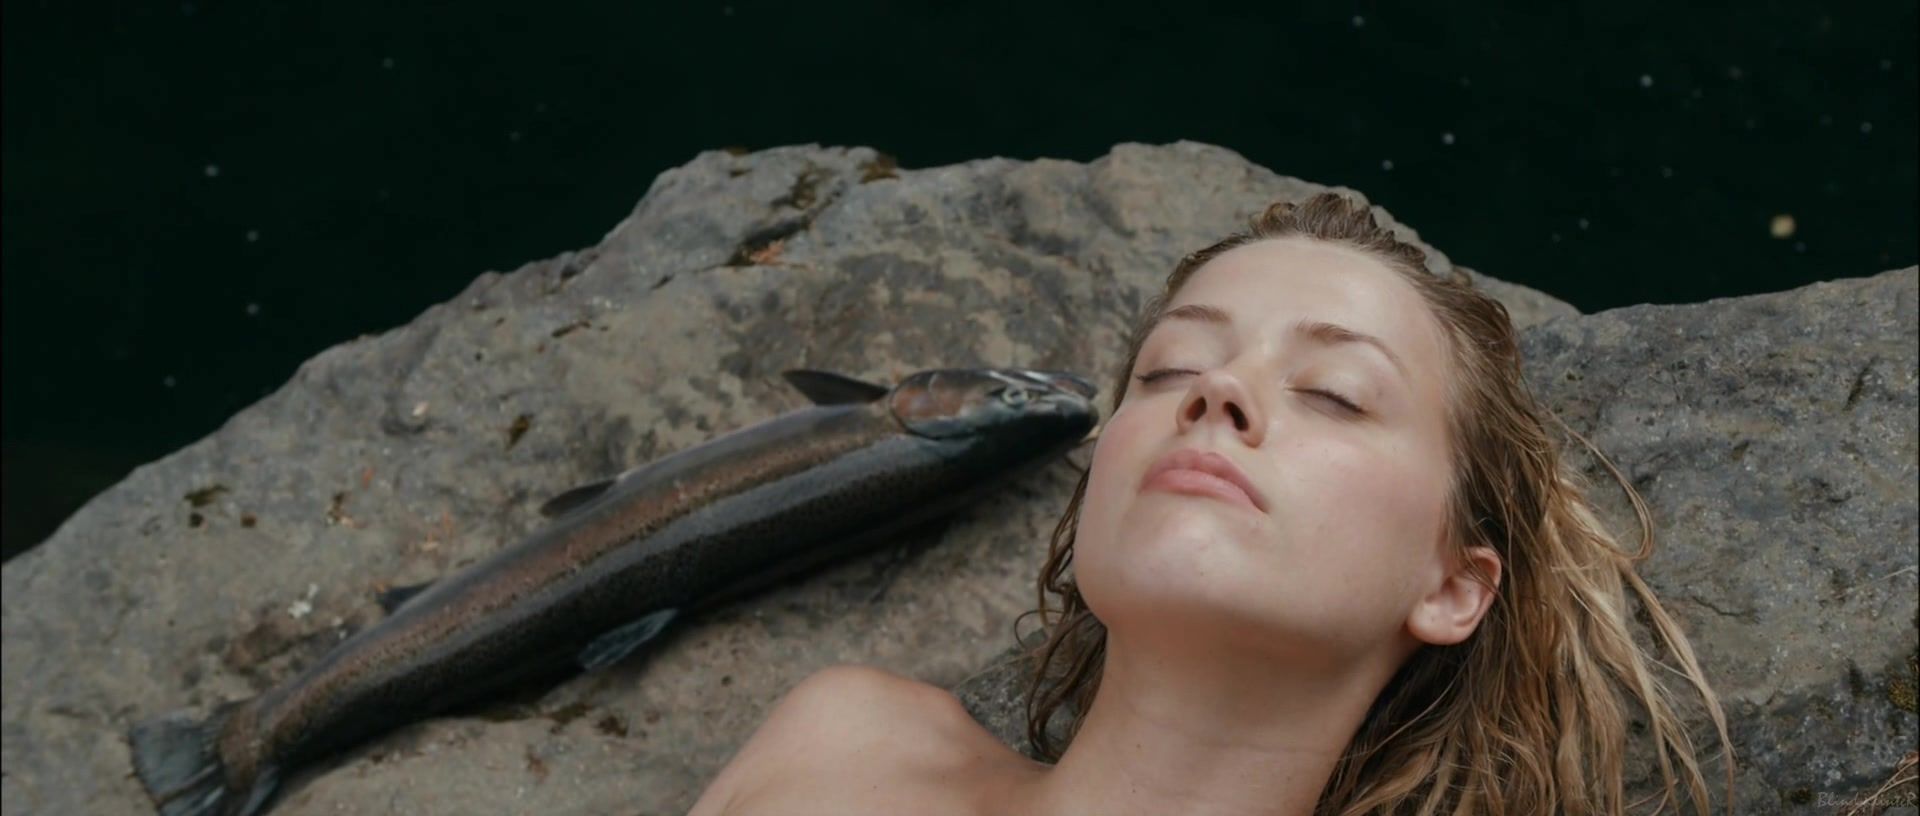 Aunt Sex video Amber Heard nude - The River Why (2010) 18 Porn